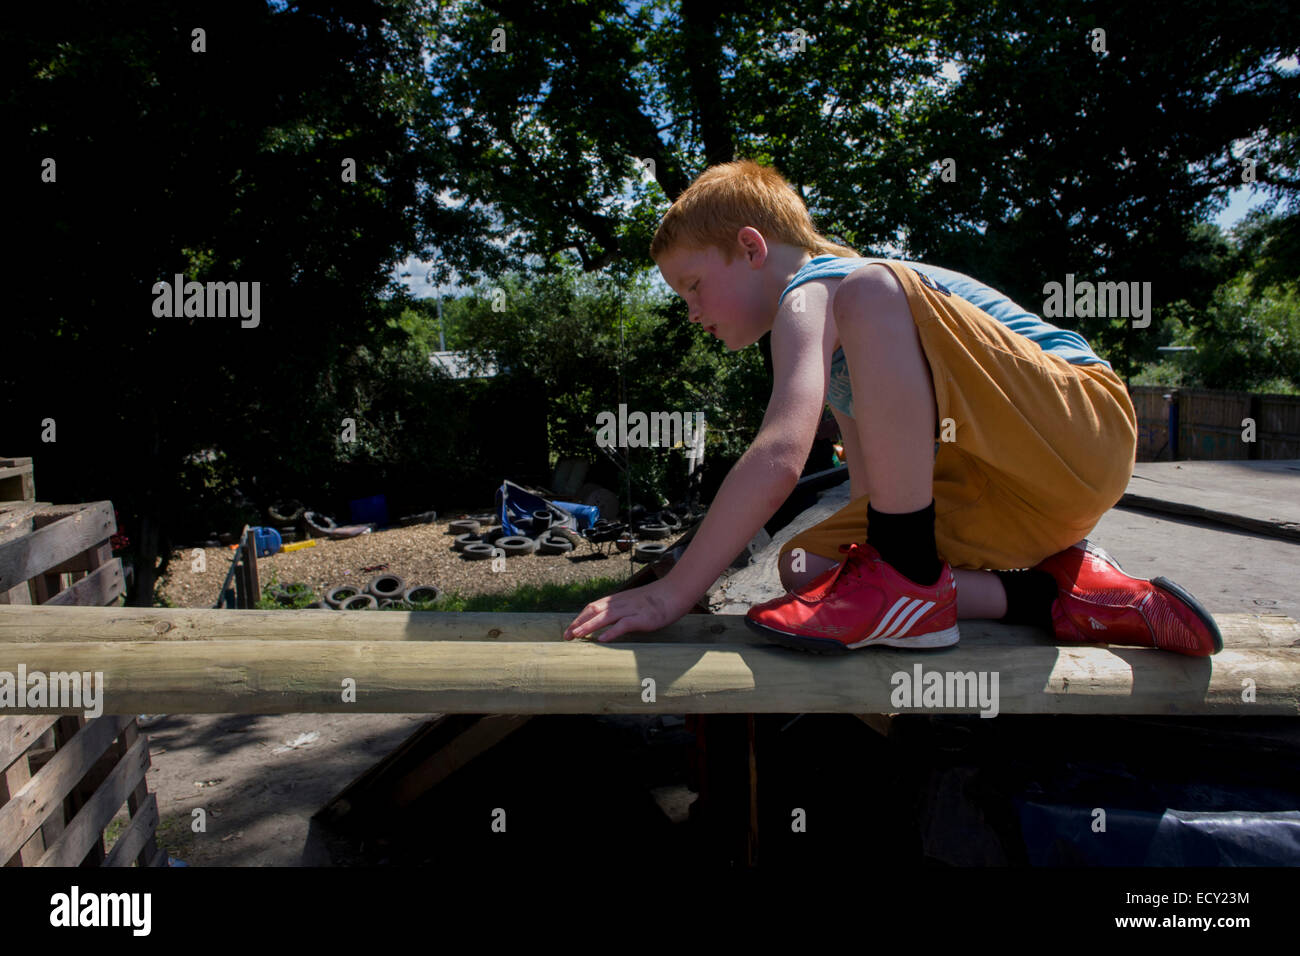 Boy plays in risk averse playground called The Land on Plas Madoc Estate, Ruabon, Wrexham, Wales. Stock Photo